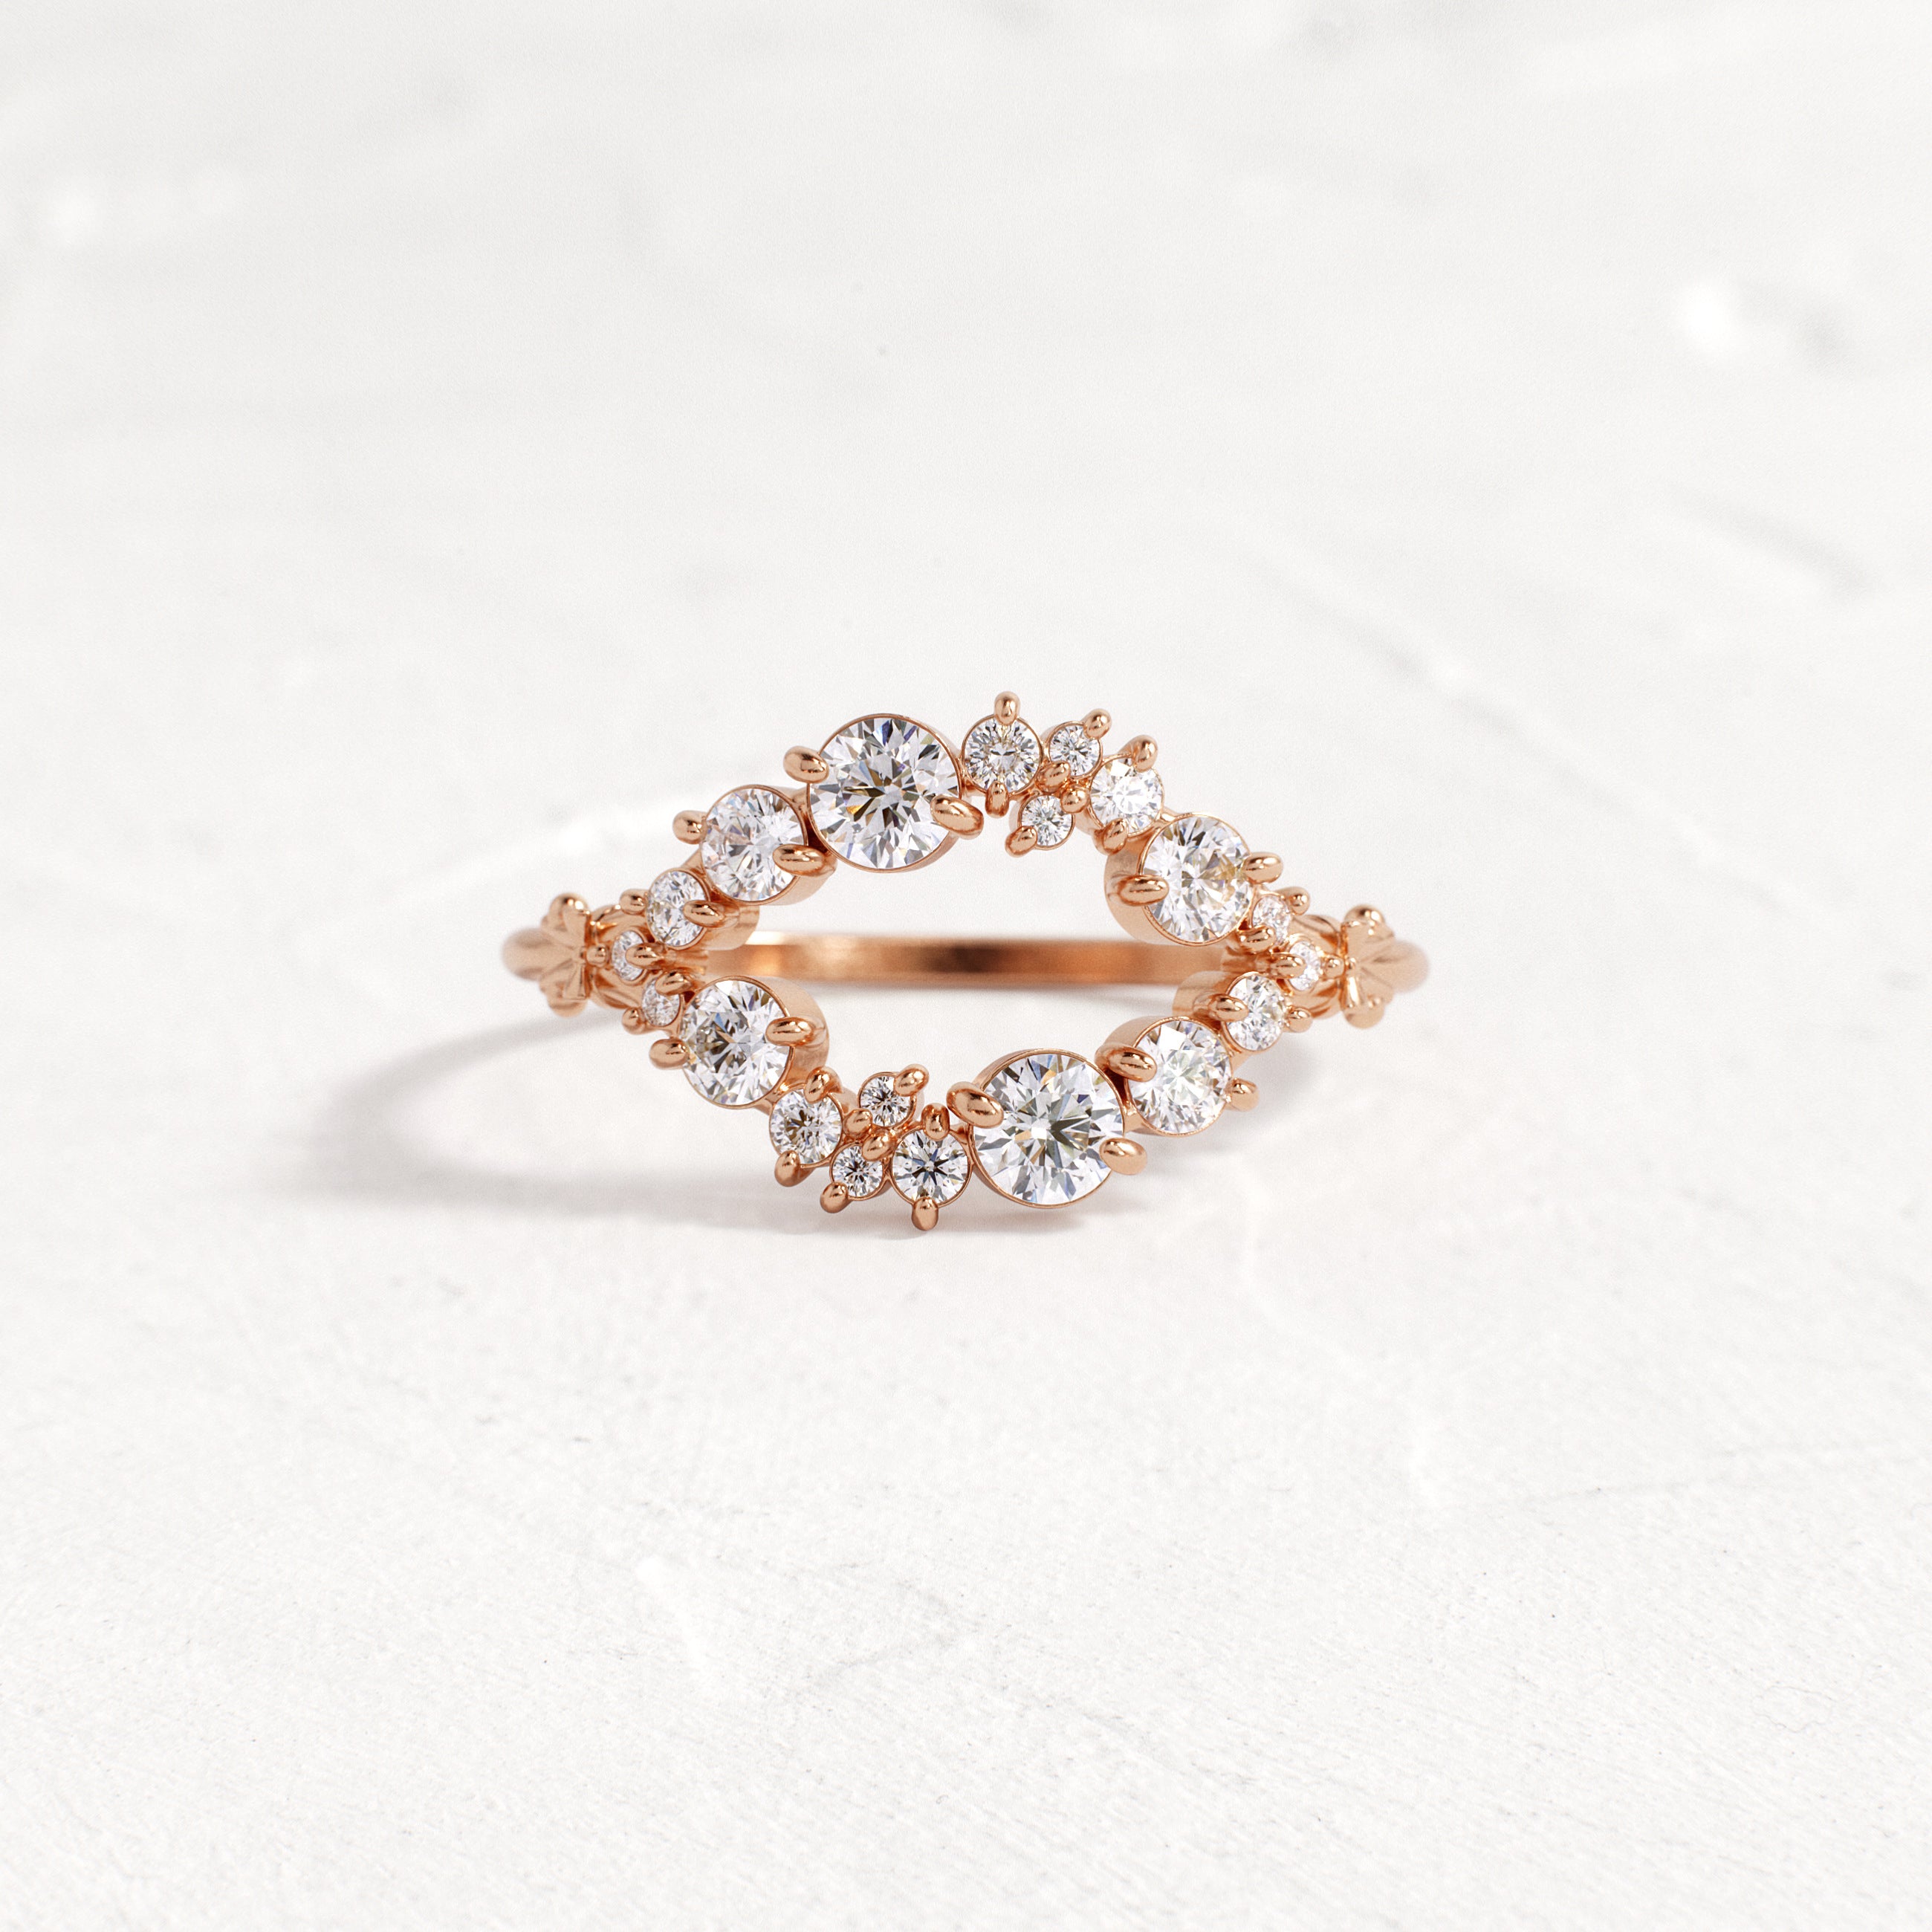 Ring Collection  Delicate & Unique Cluster Designs from Melanie Casey